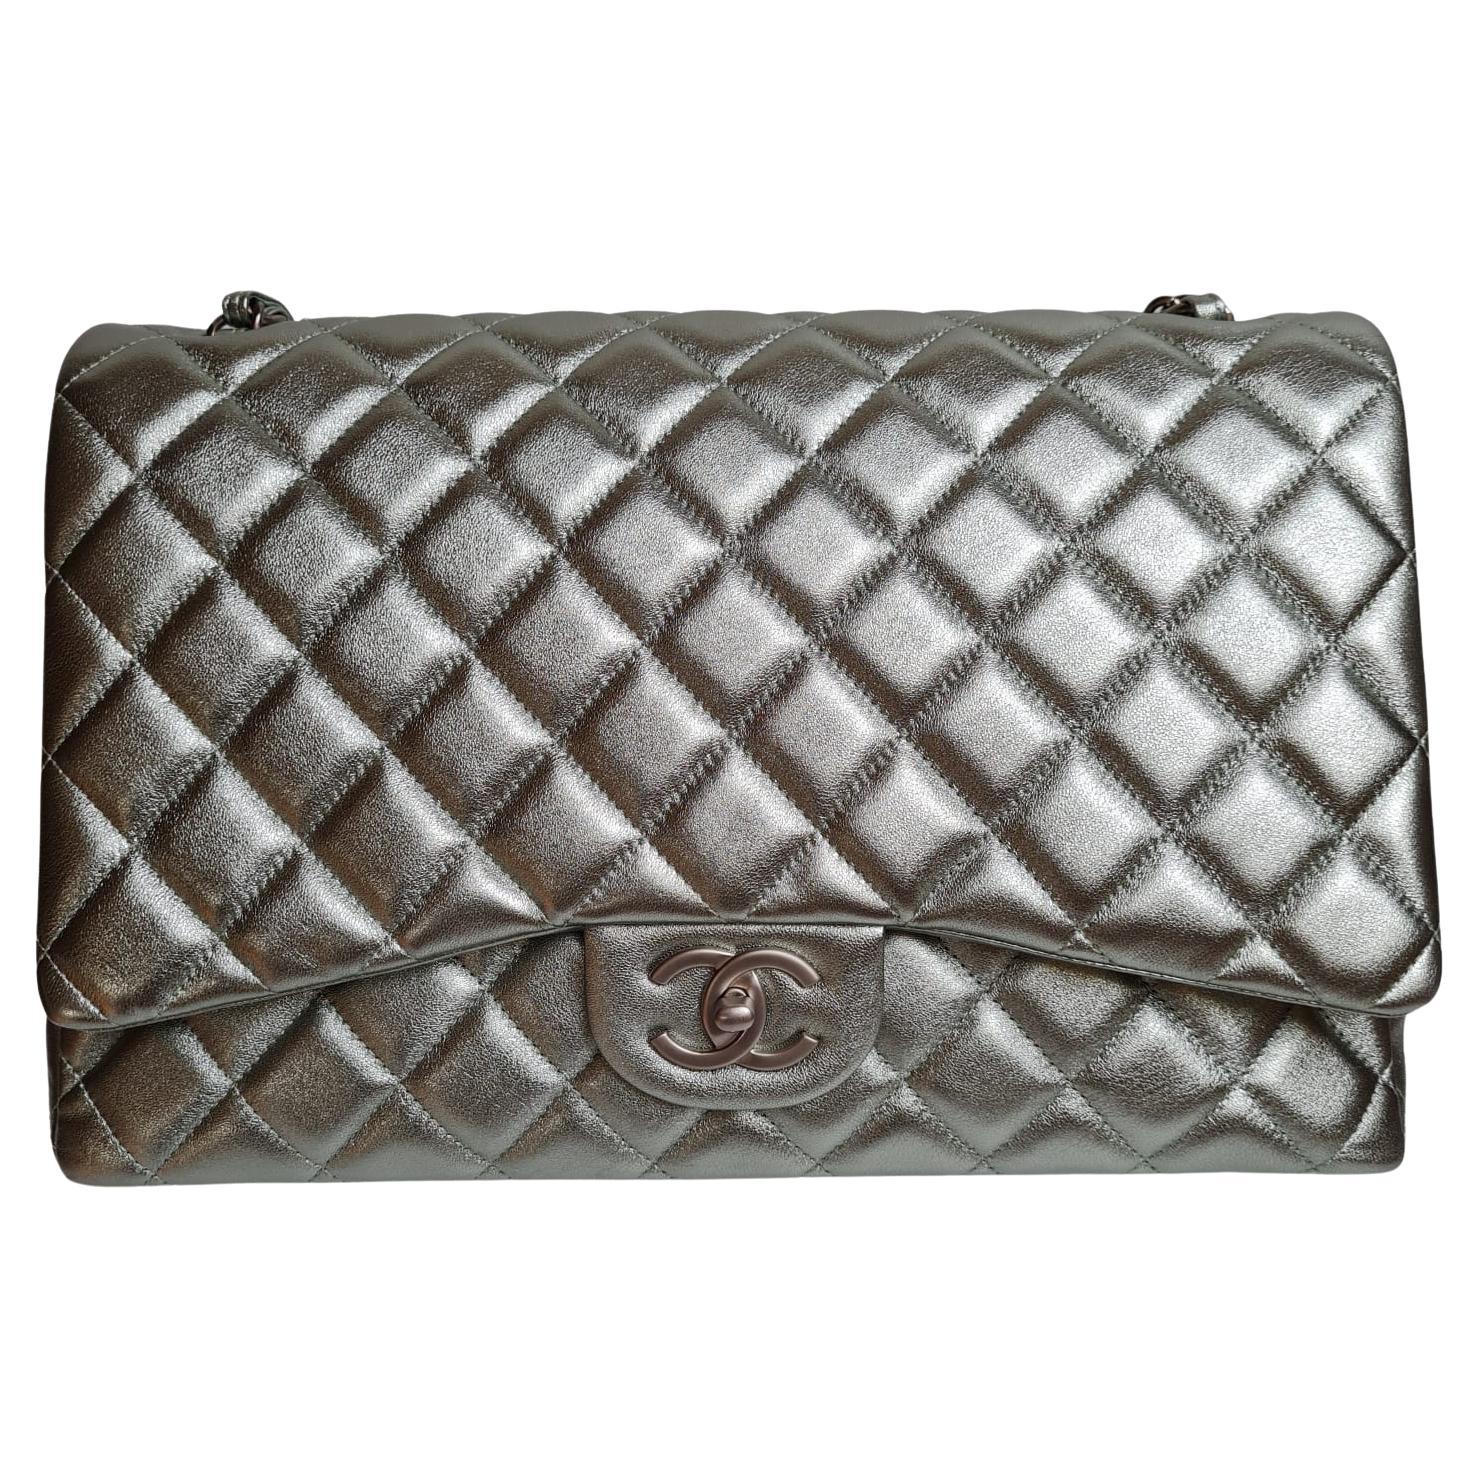 Chanel Silver Metallic Lambskin Quilted Maxi Double Flap Bag